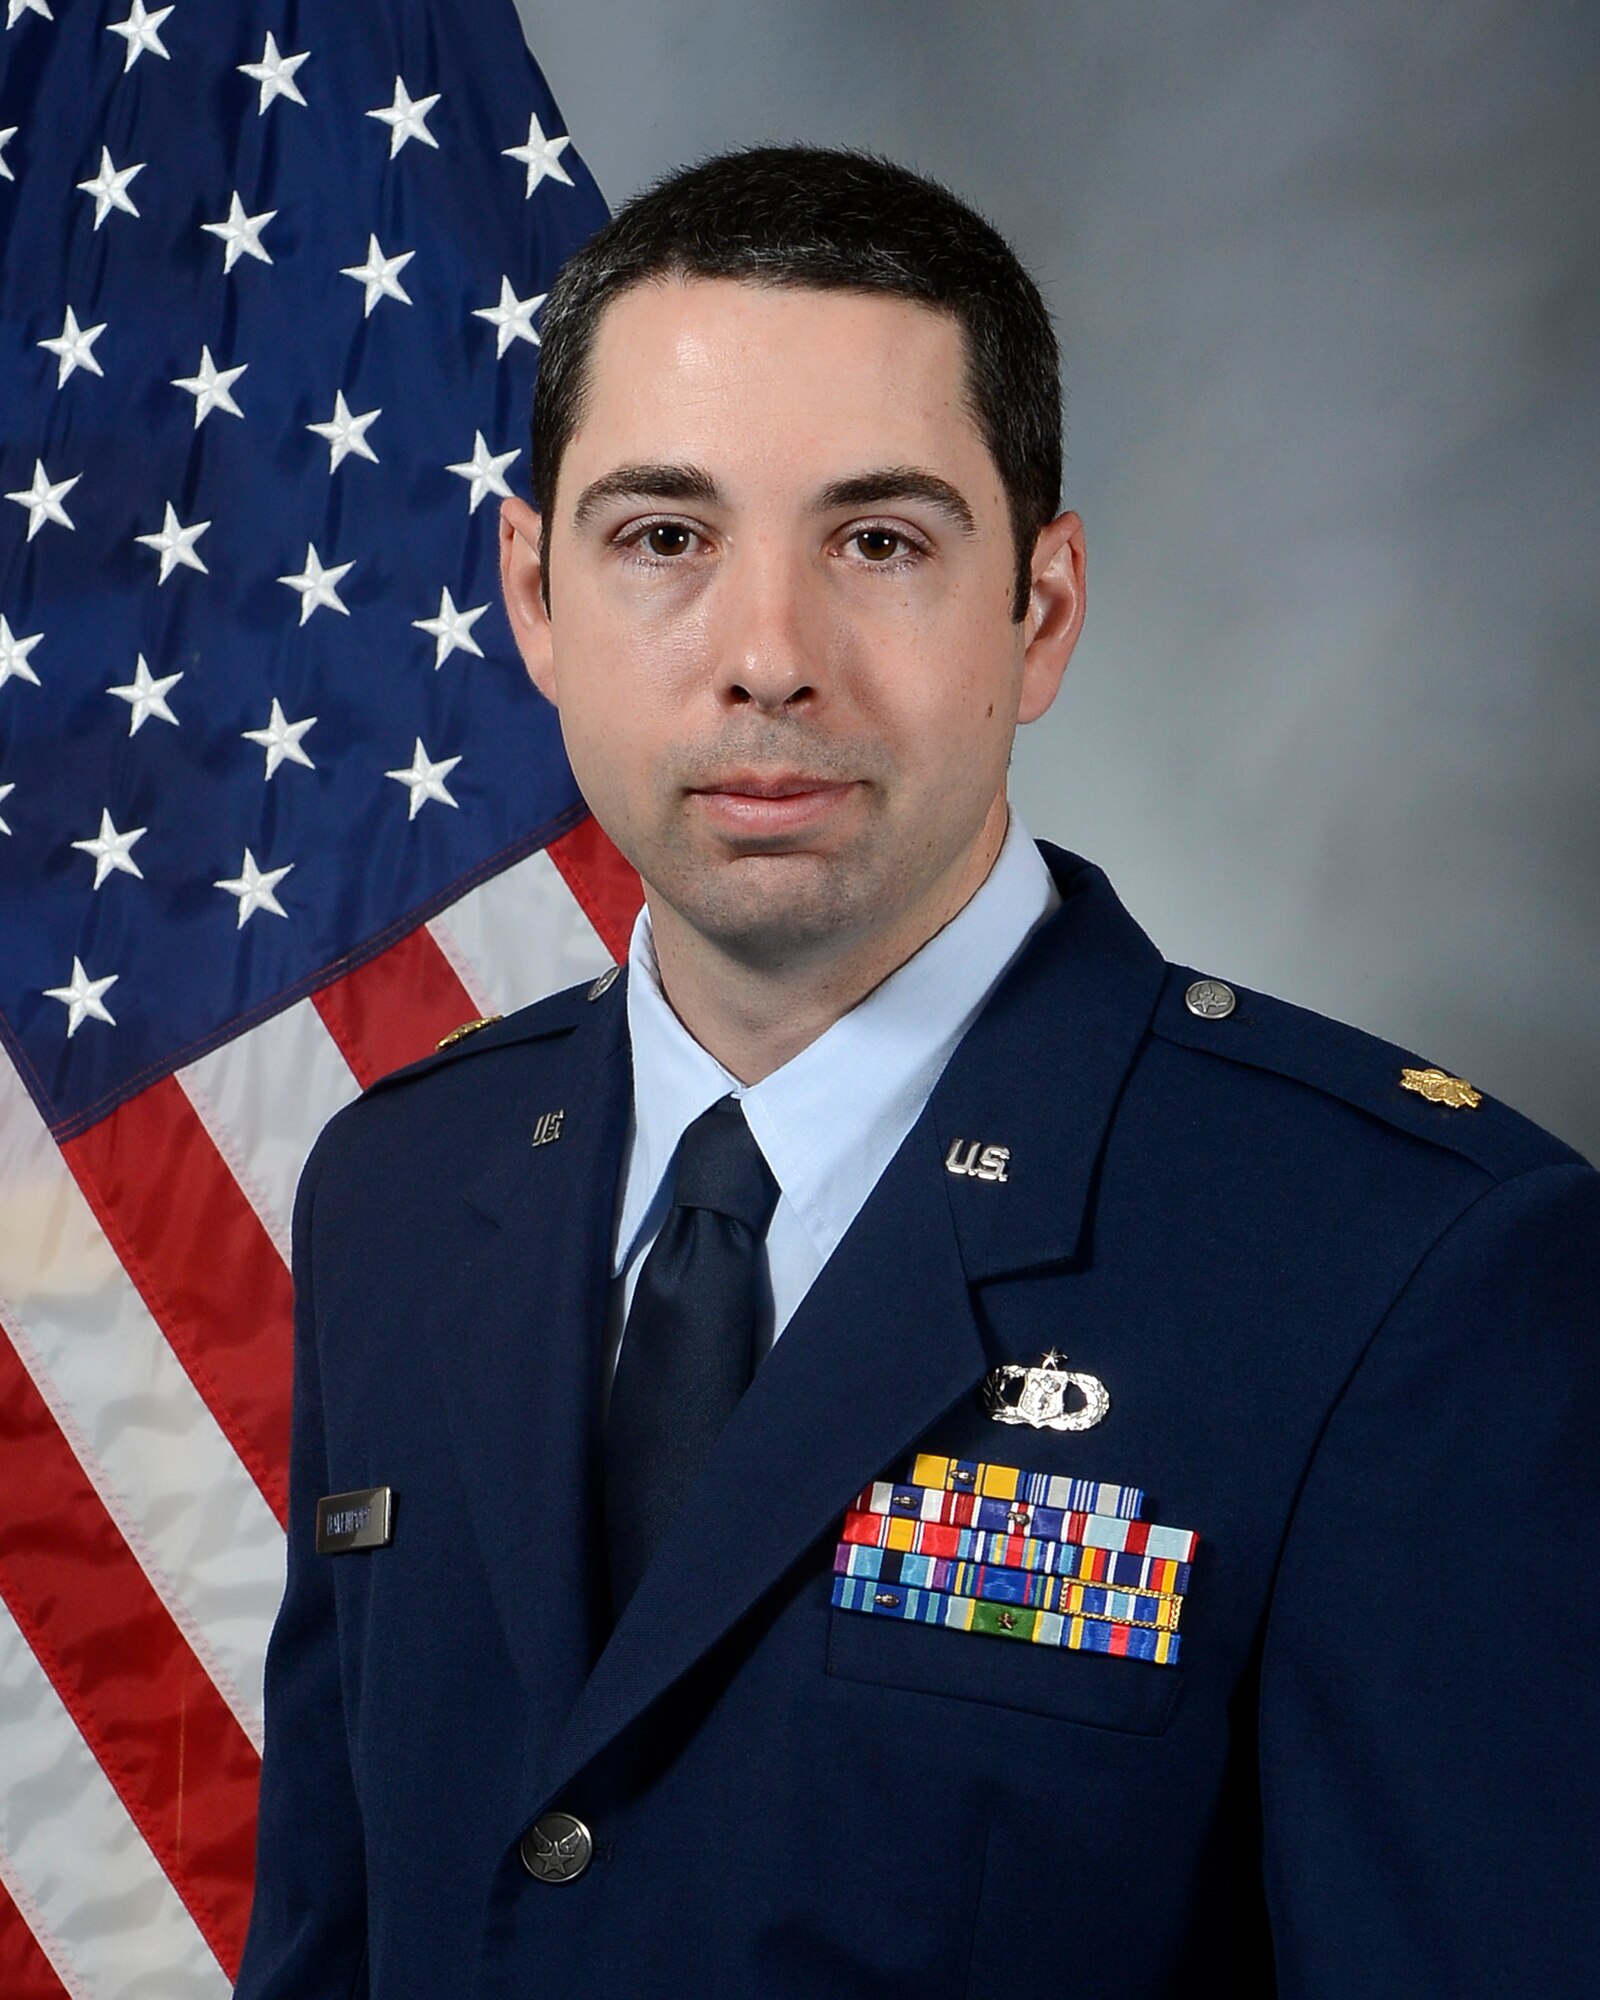 Air Force Maj. Robert Davenport, 509th Operations Support Squadron flight commander at Whiteman Air Force Base, Mo., was recognized as the 2014 Air Force Weather Field Grade Officer of the Year. In this category, Davenport distinguished himself in his career field with numerous accomplishments he credits to team effort. (U.S. Air Force photo/Released)
